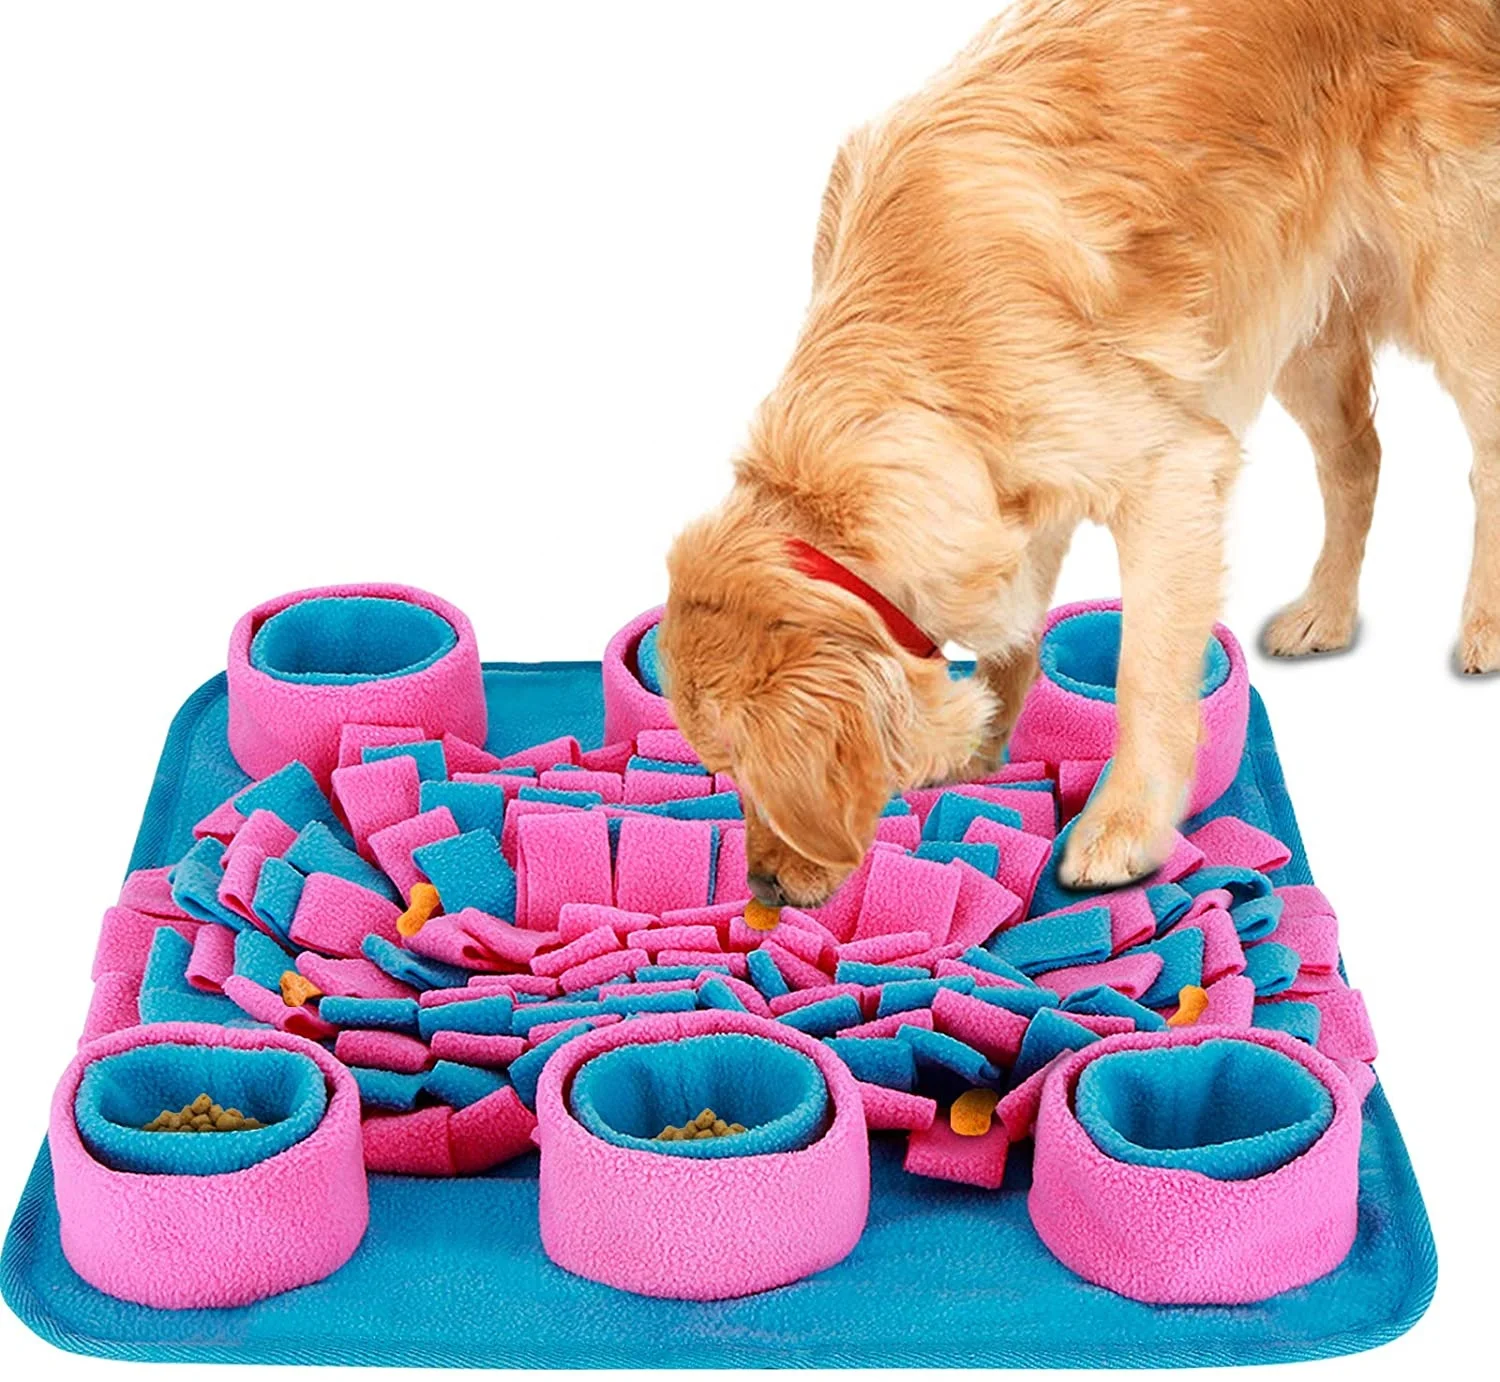 Pet Snuffle Mat, Slow Feeder Bowl For Dogs, Training Play Blanket, Pet  Supplies